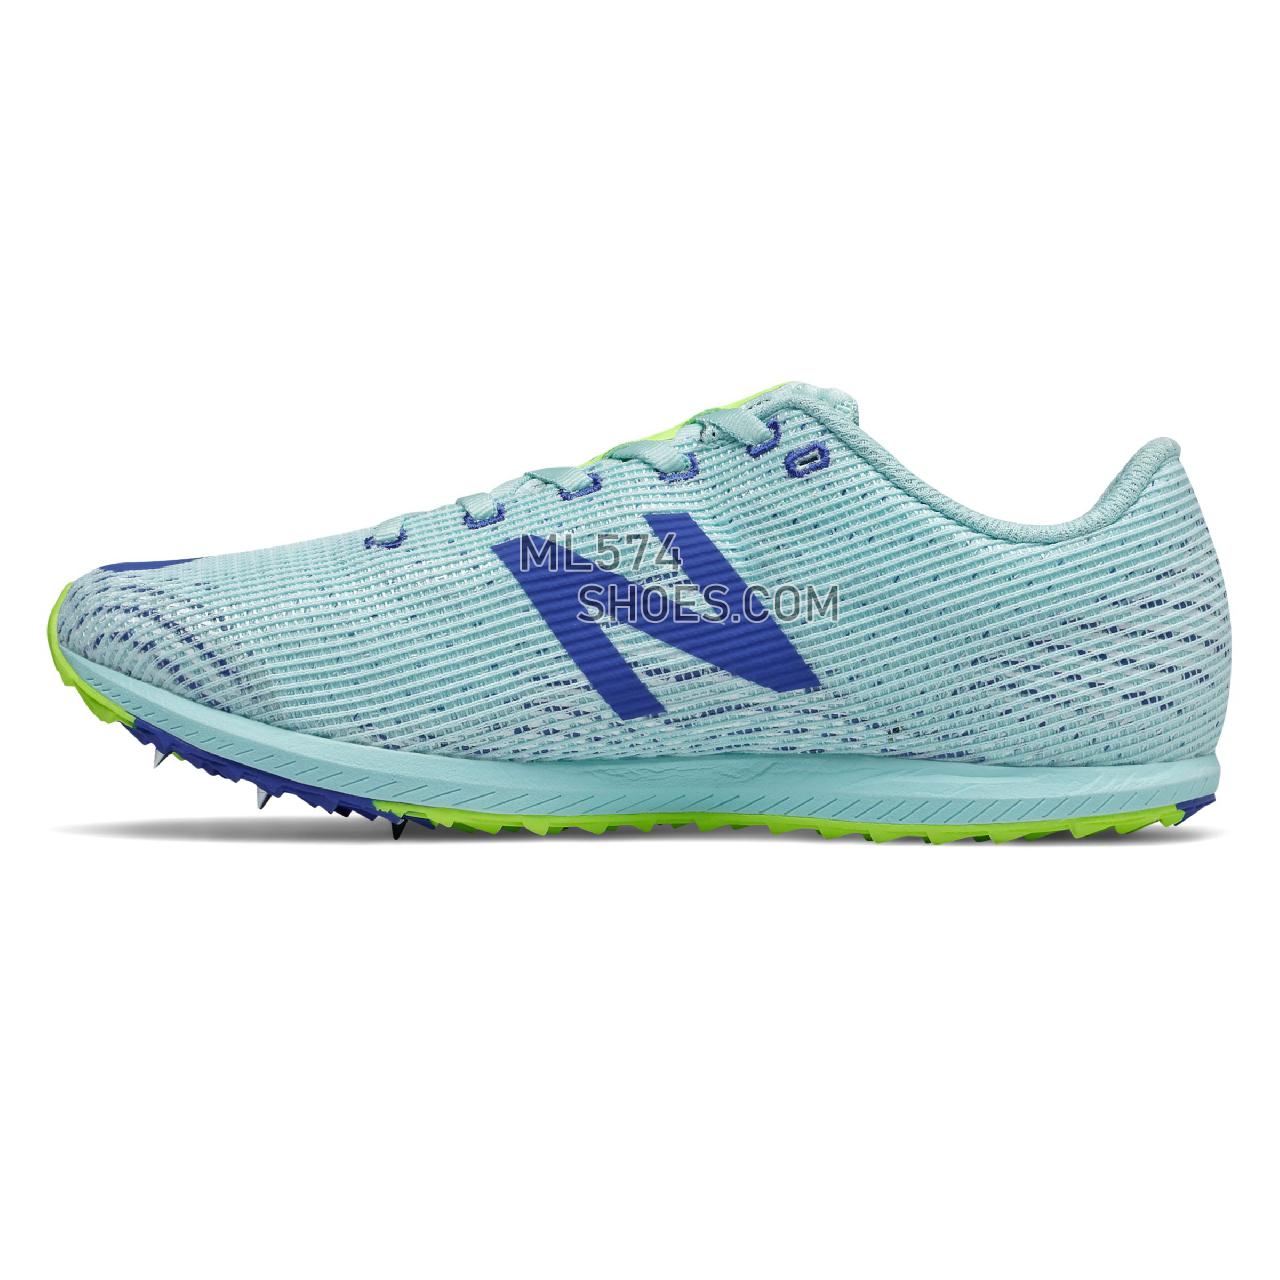 New Balance XC Seven v3 - Women's Competition Running - Glacier with Cobalt - WXCS7YB3